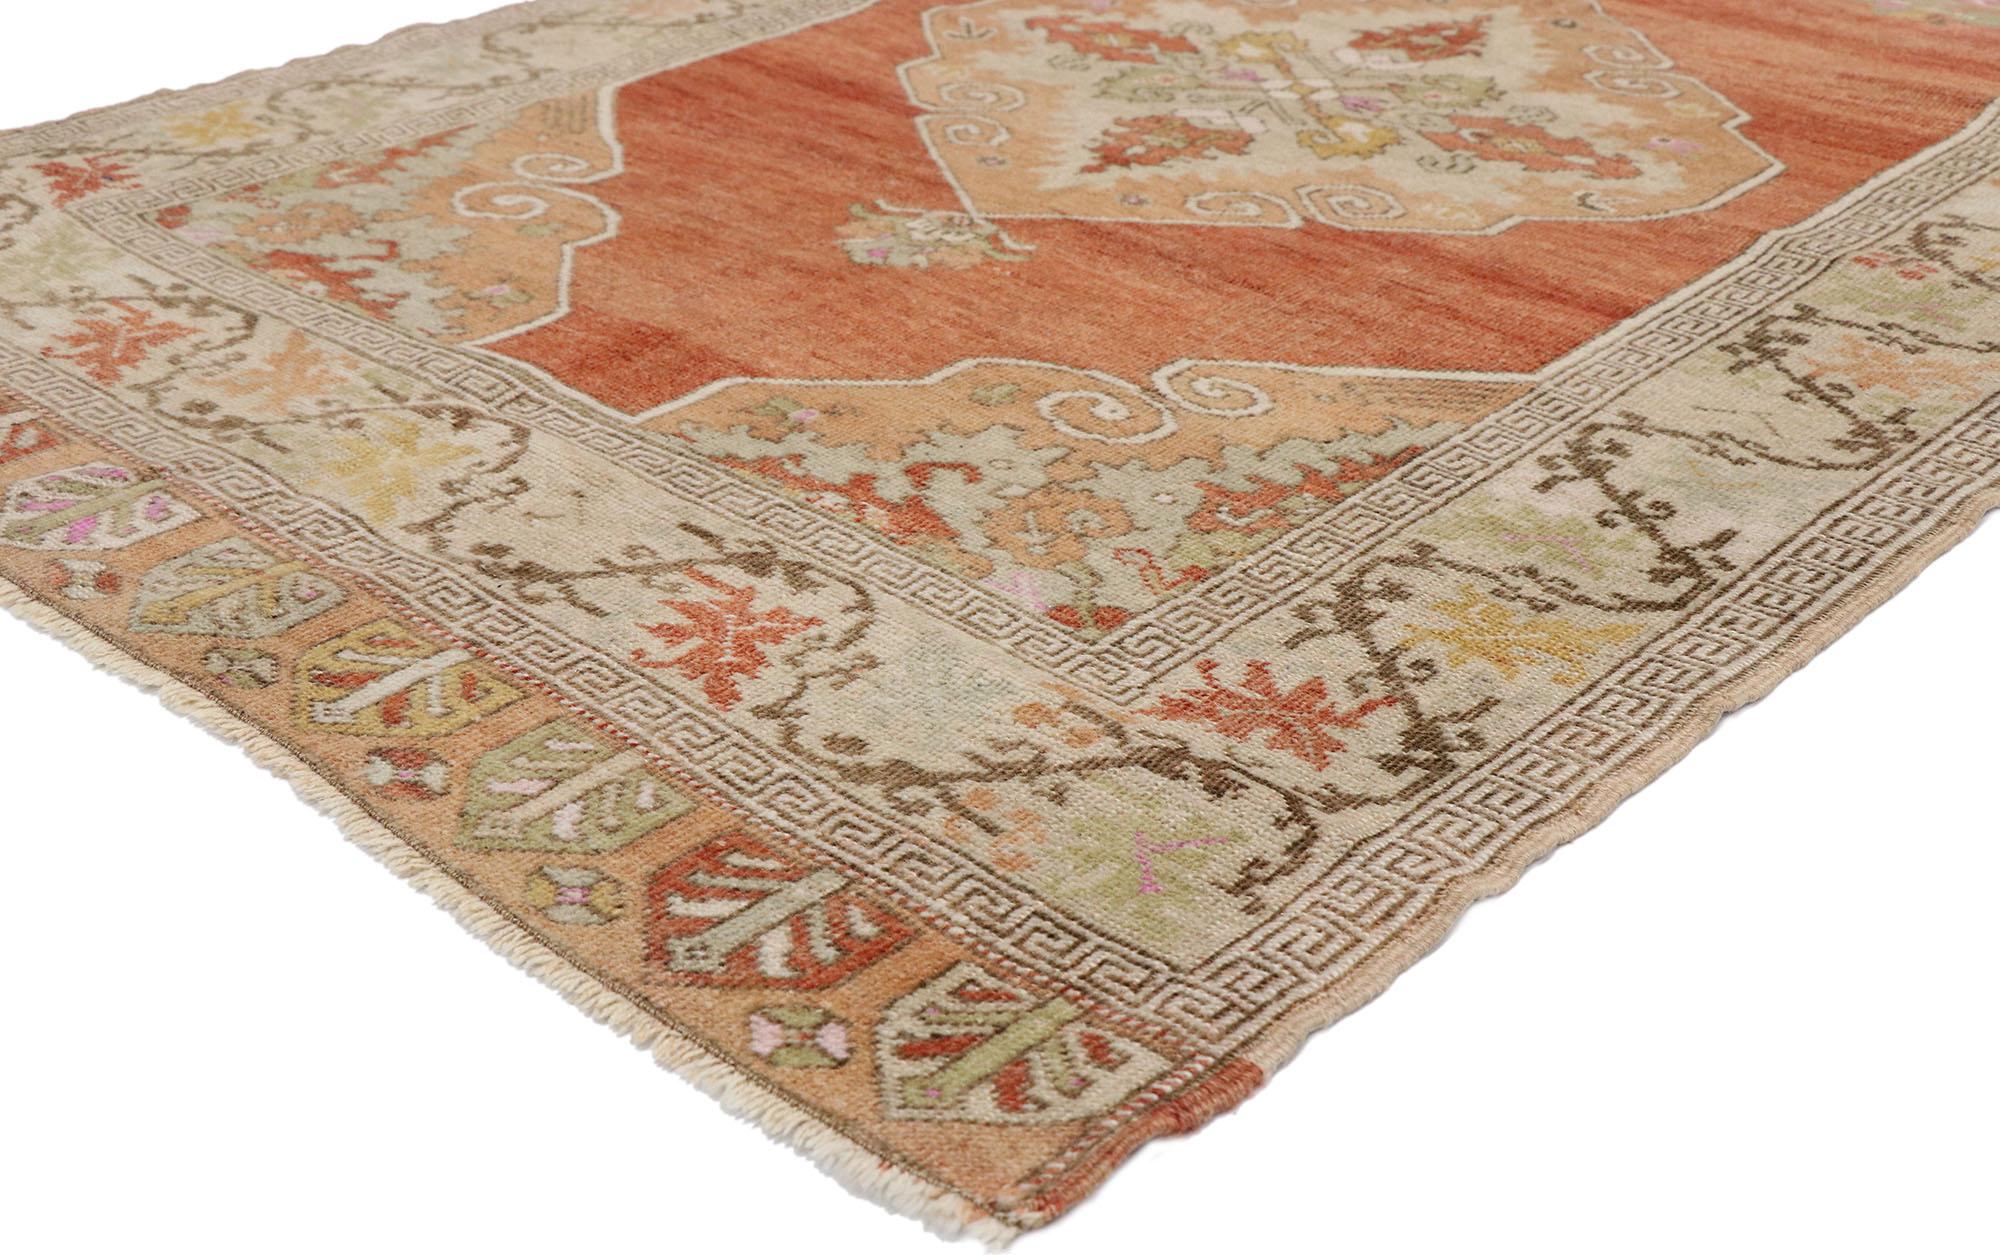 52742, vintage Turkish Oushak runner with Feminine Rustic Arts & Crafts style 03'06 x 12'10. This hand knotted wool vintage Turkish Oushak runner features three medallions anchored with palmette finials at either end and dotted with floral bouquets